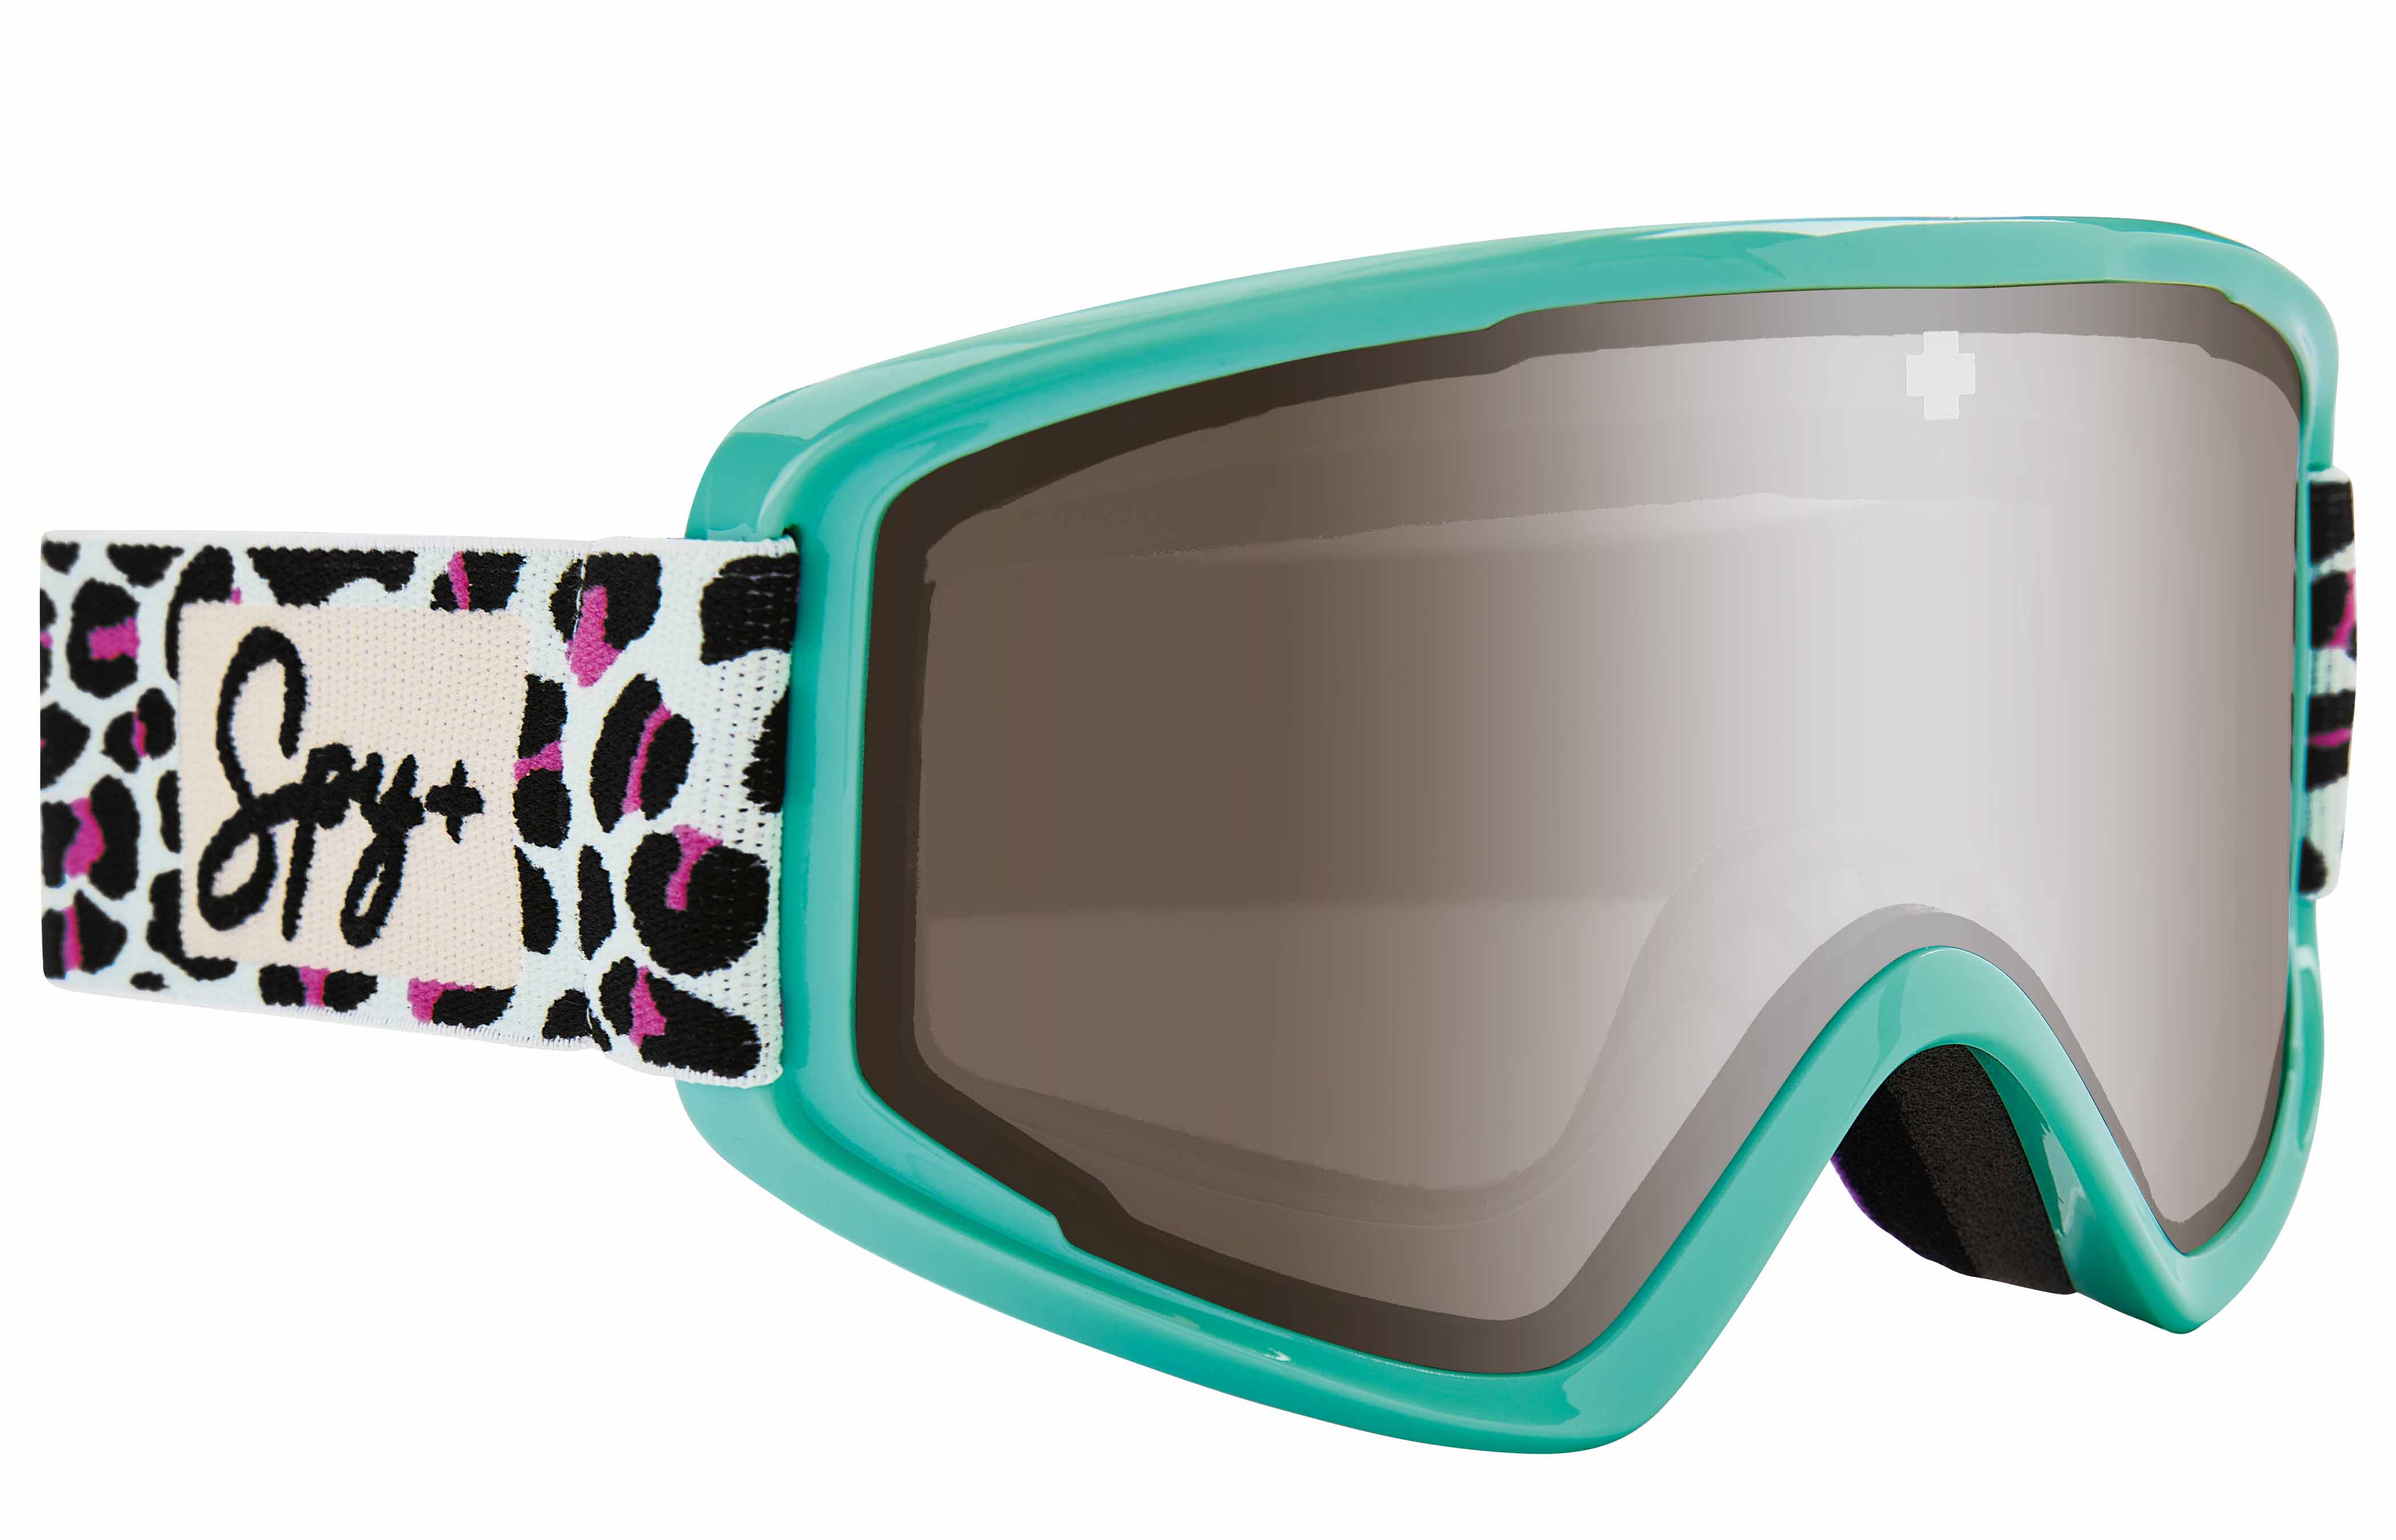 Front View of the Crusher Elite Jr Snow Goggle